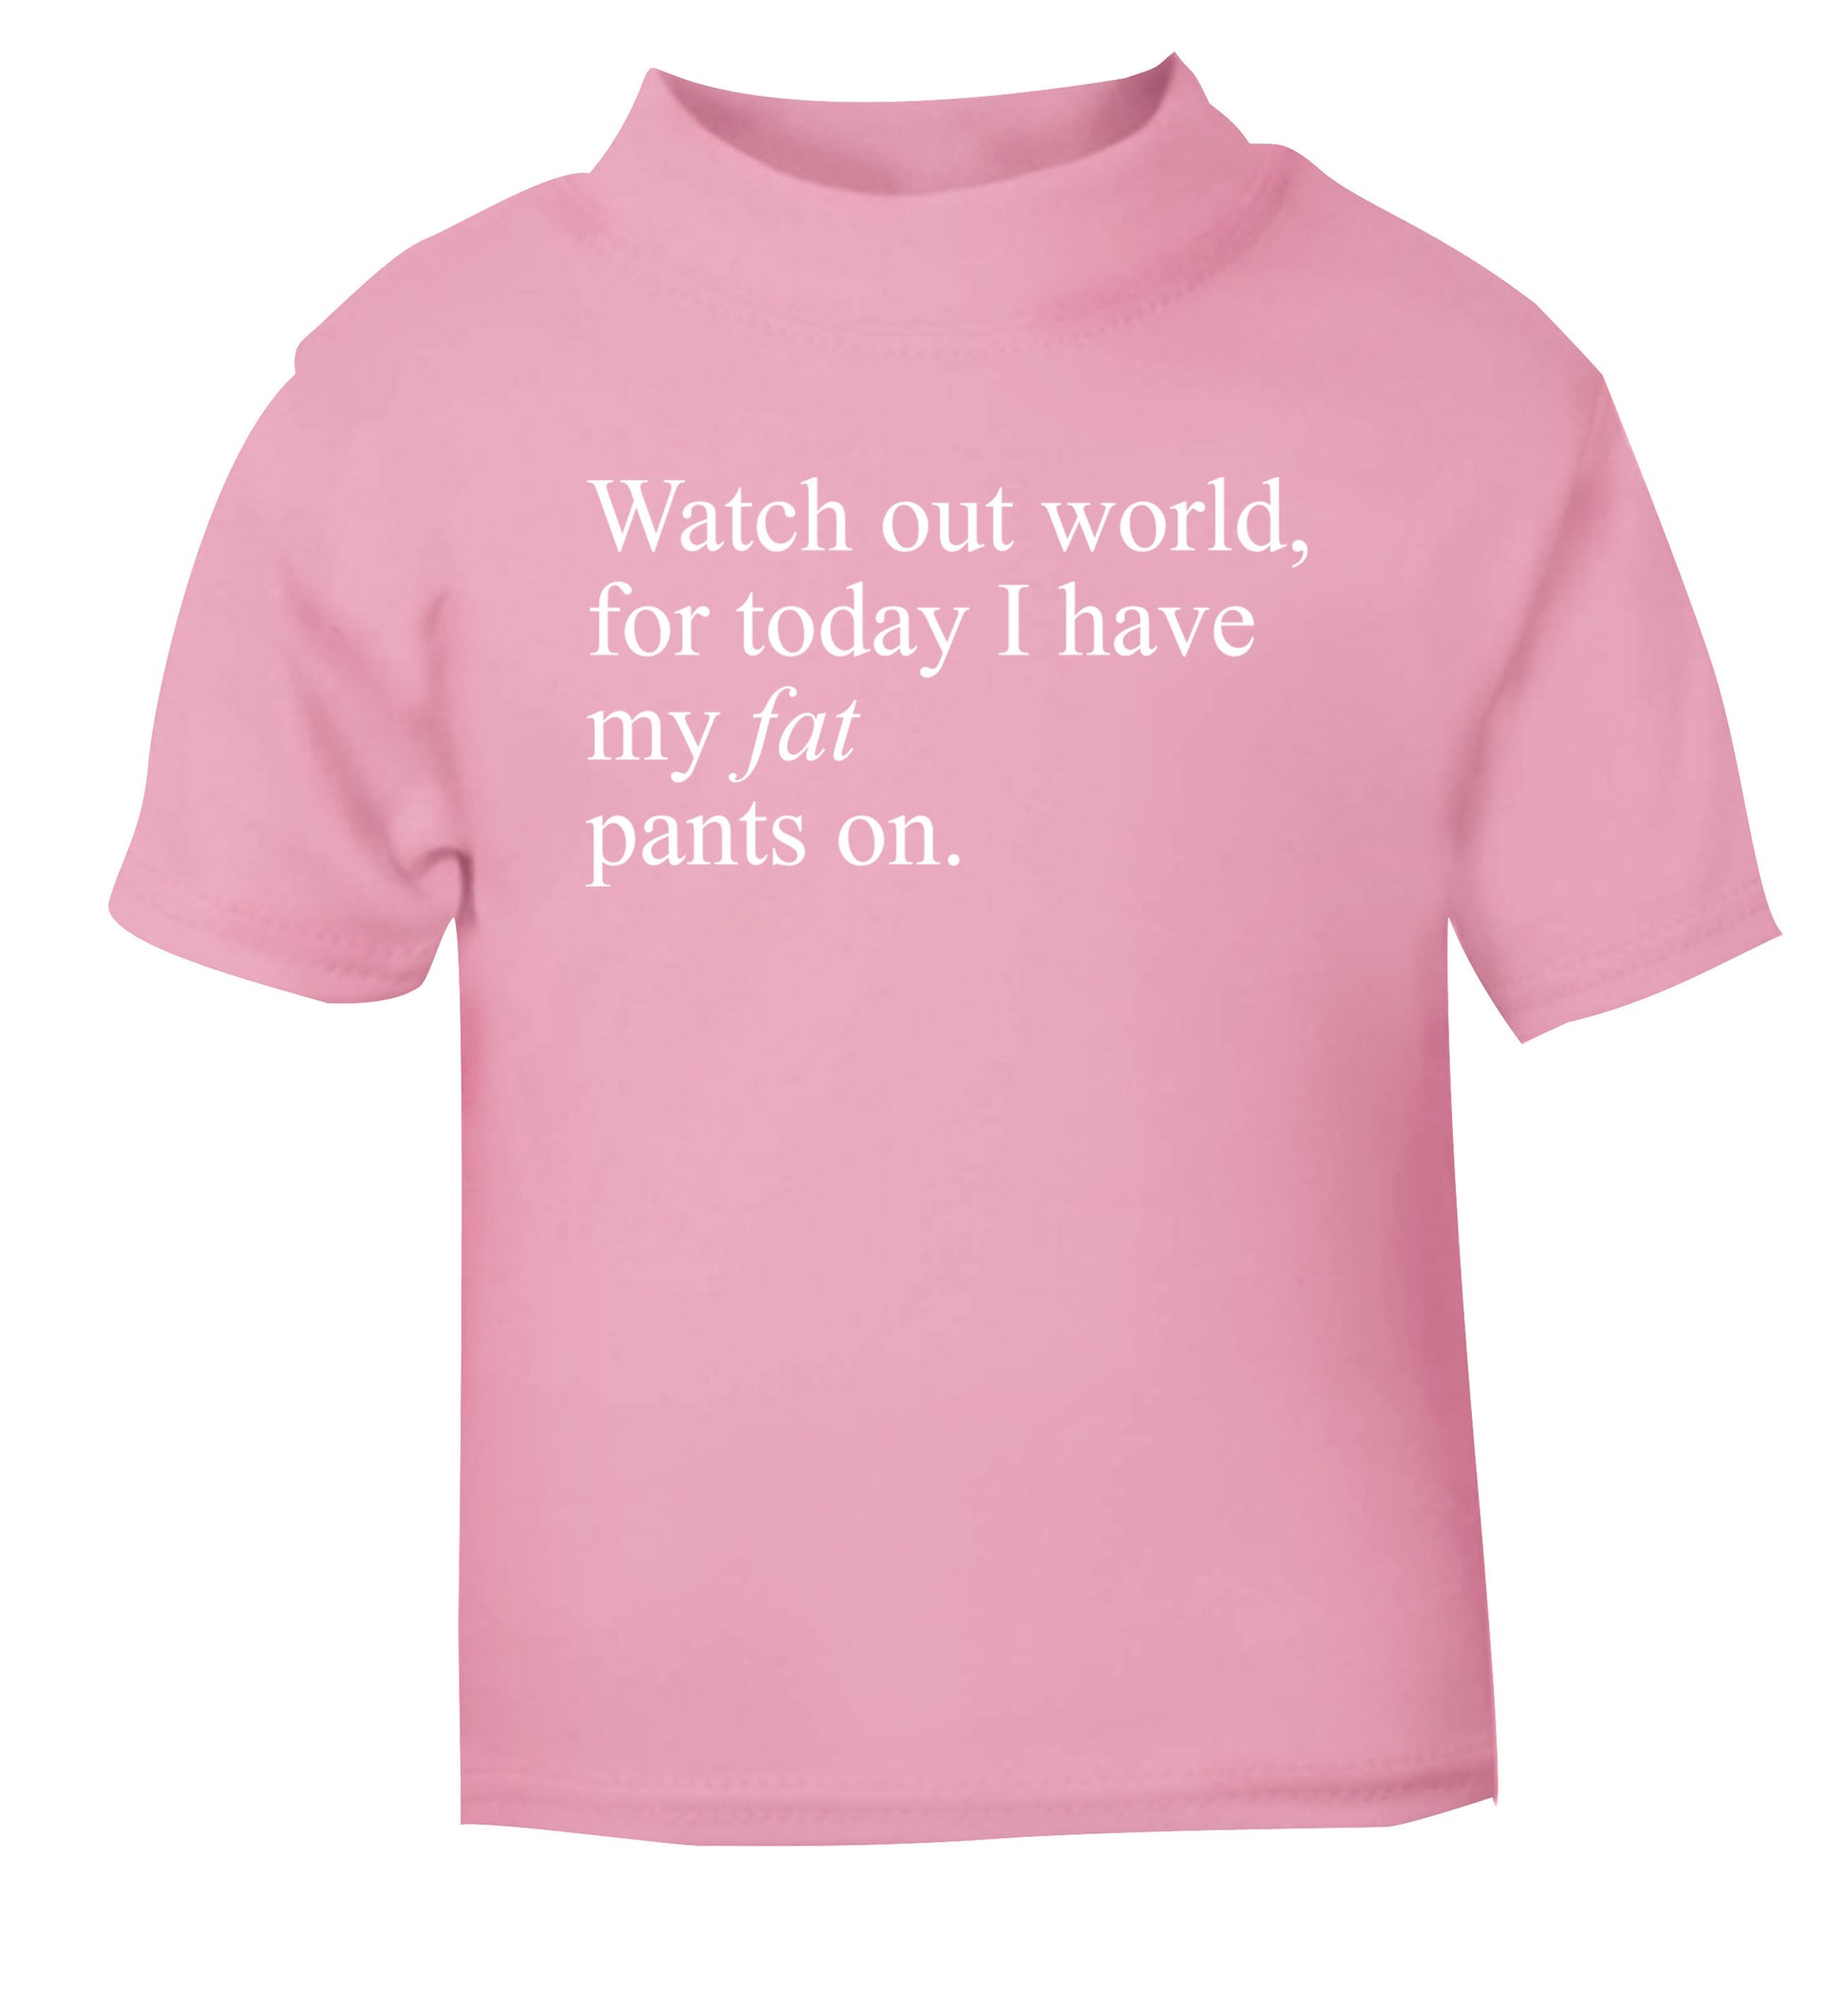 Watch out world, for today I have my fat pants on light pink Baby Toddler Tshirt 2 Years